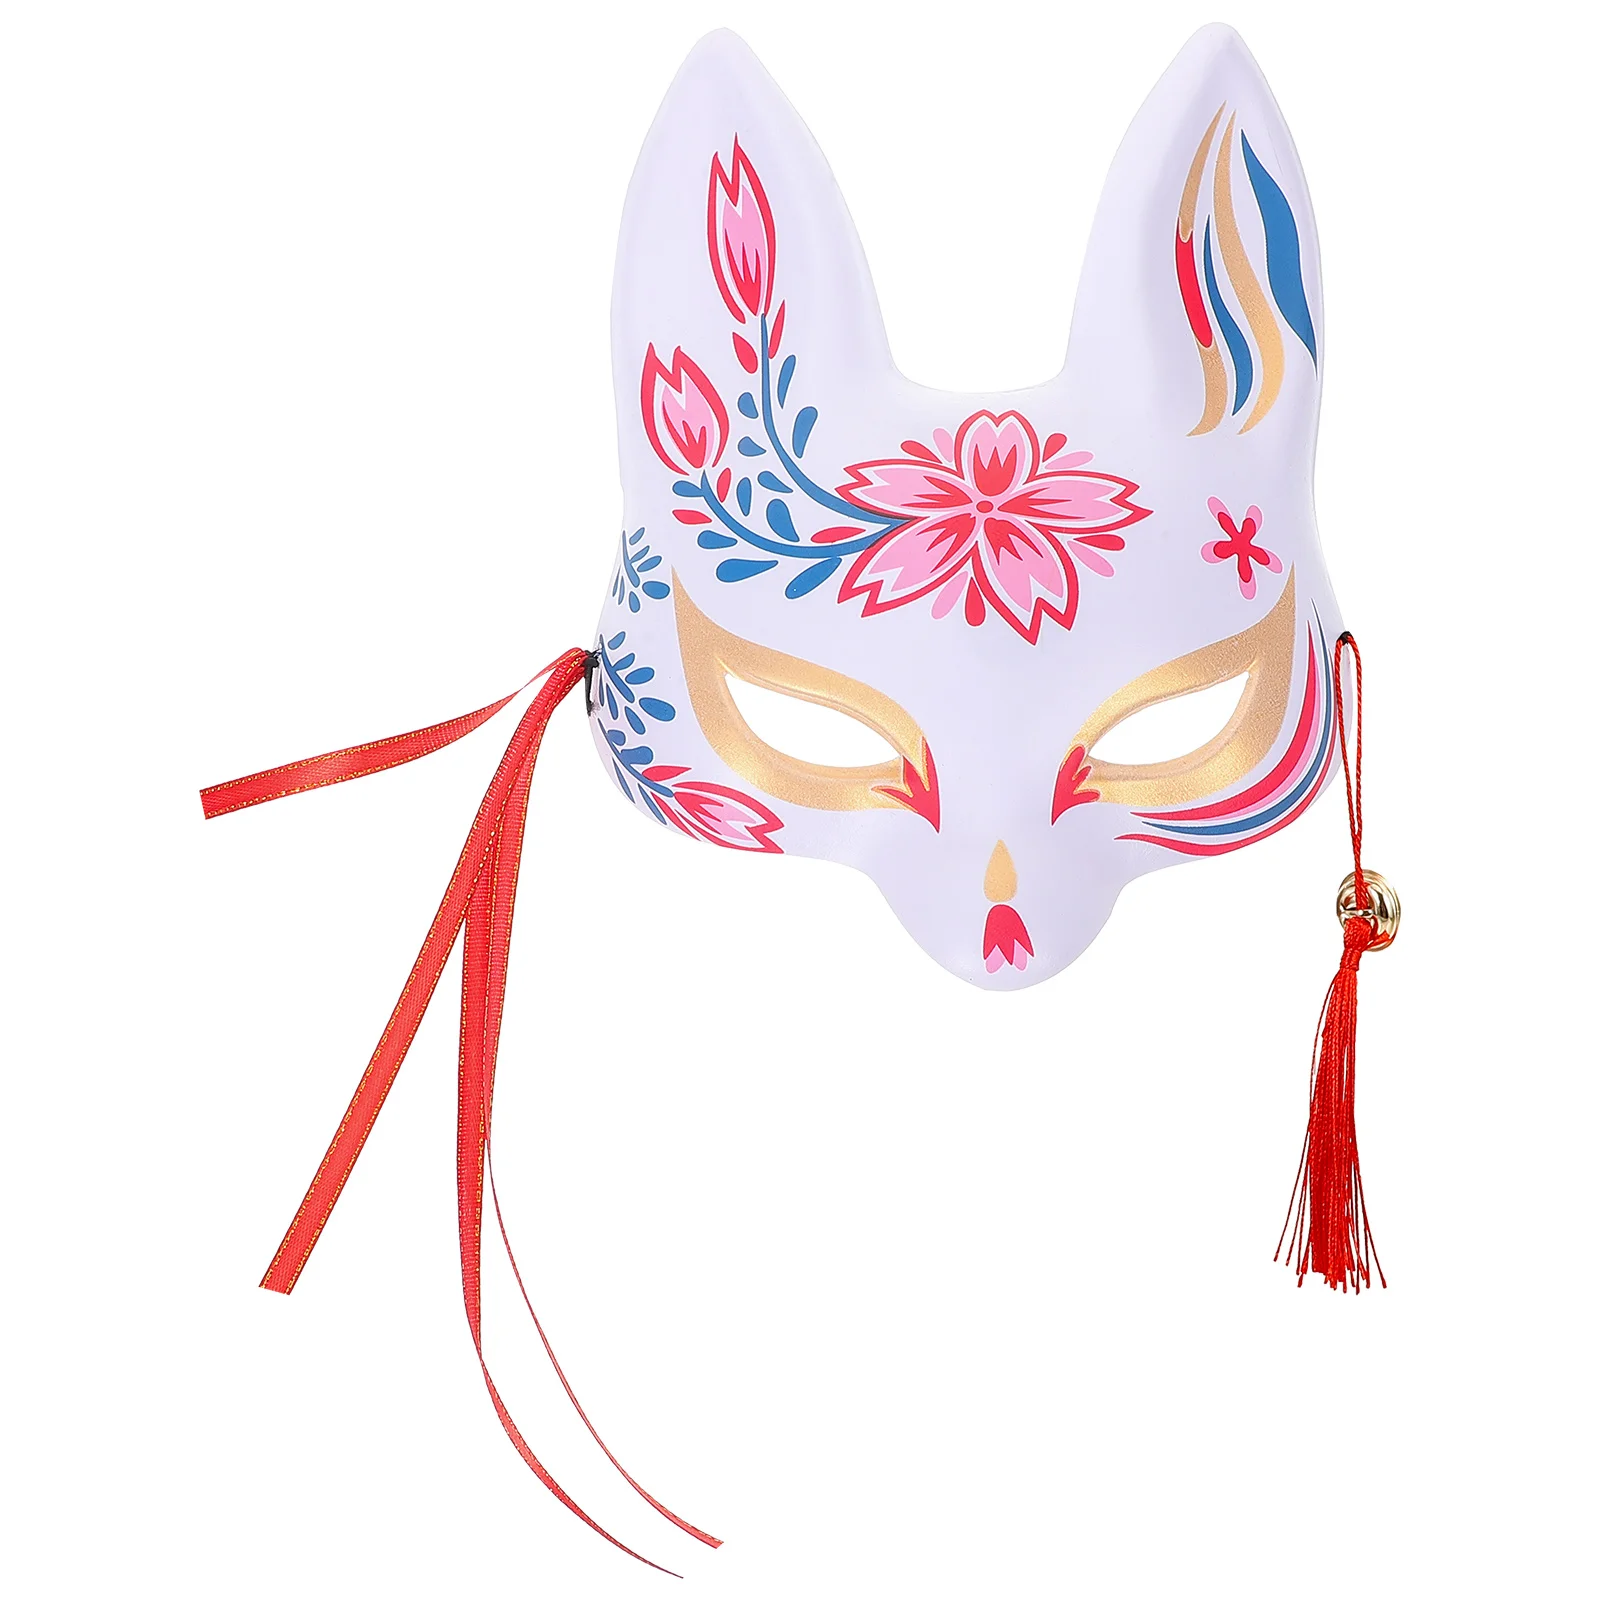 

Fox Demon Mask Decor for Cosplay Japanese Style Animal Masquerade Half Face Pvc Foxes Delicate Party Miss